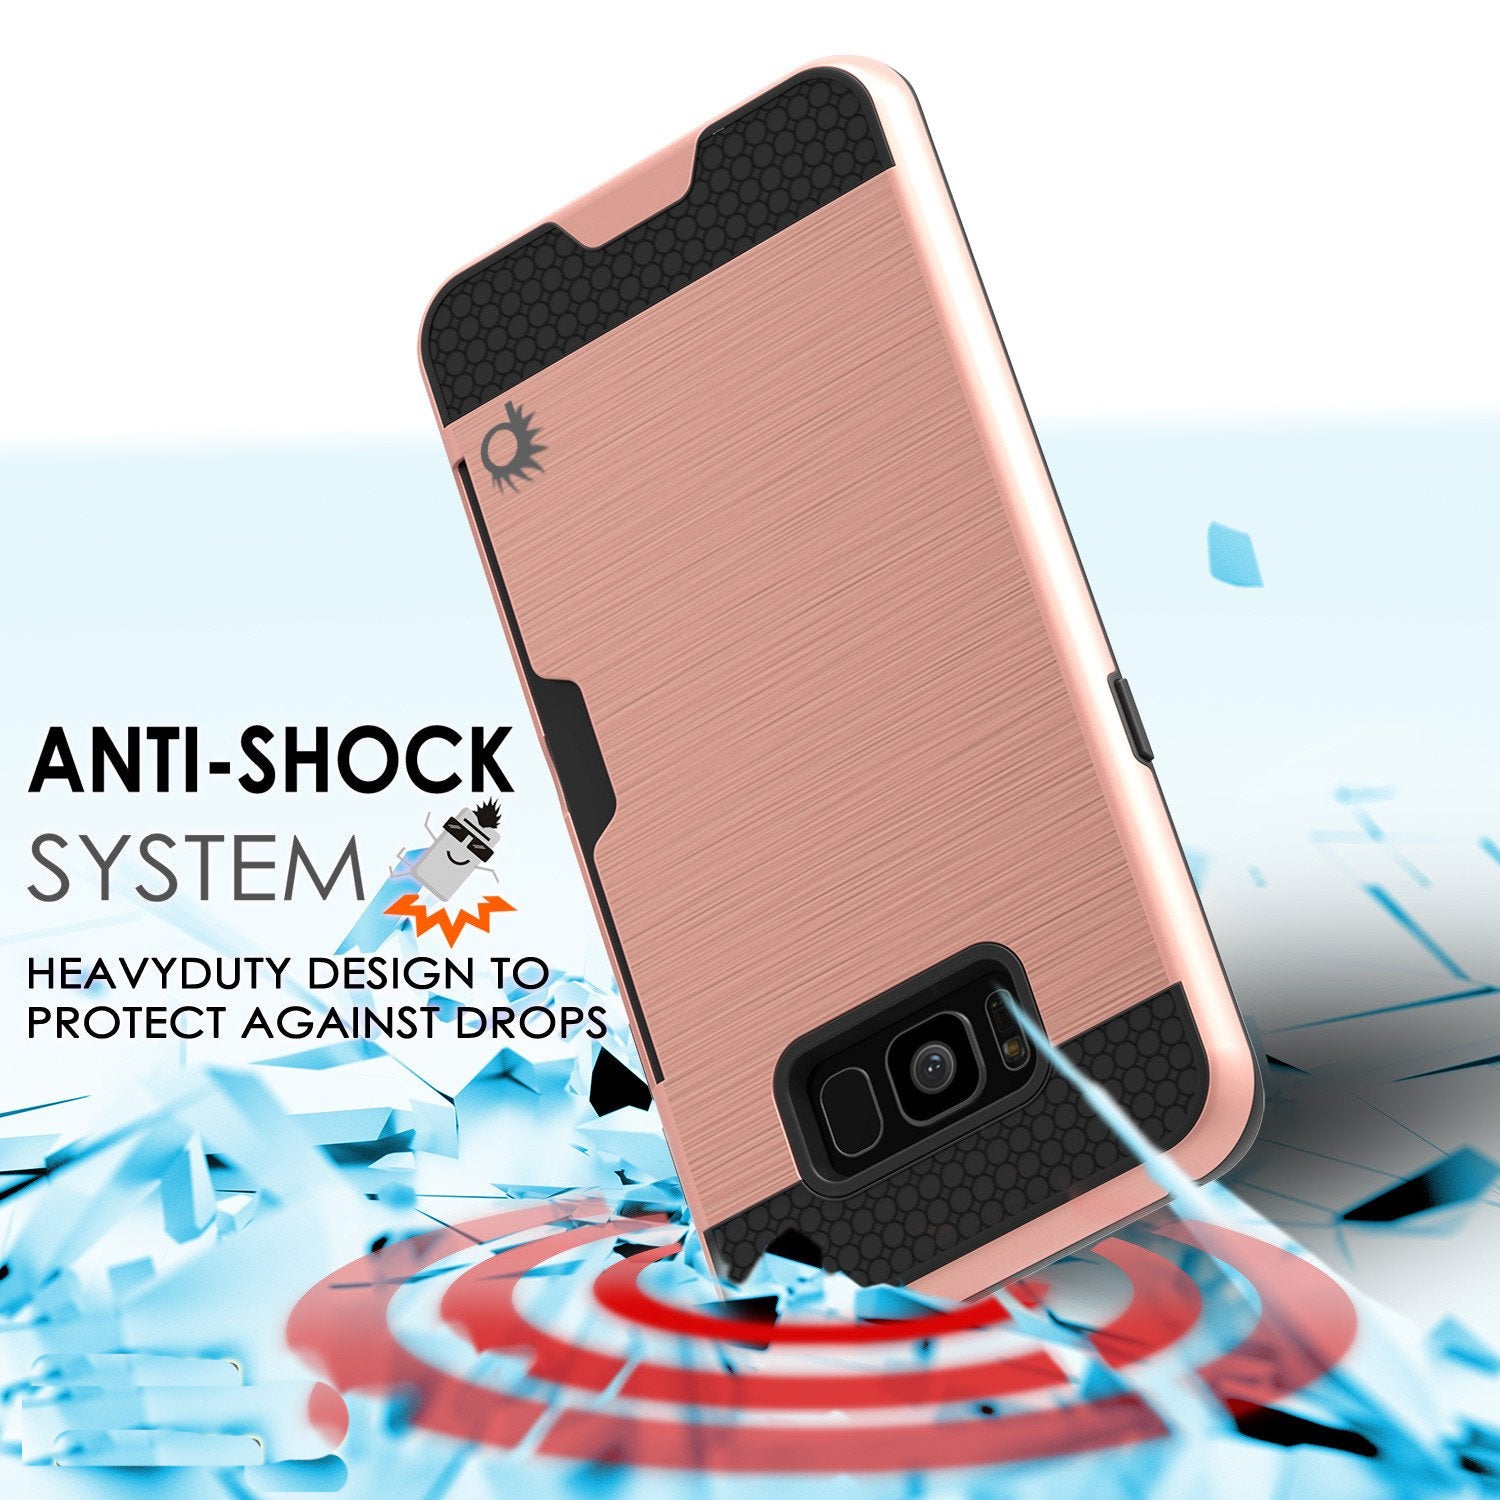 Galaxy S8 Case, PUNKcase [SLOT Series] Dual-Layer Armor Cover w/Integrated Anti-Shock System, Credit Card Slot & Screen Protector [Rose Gold]